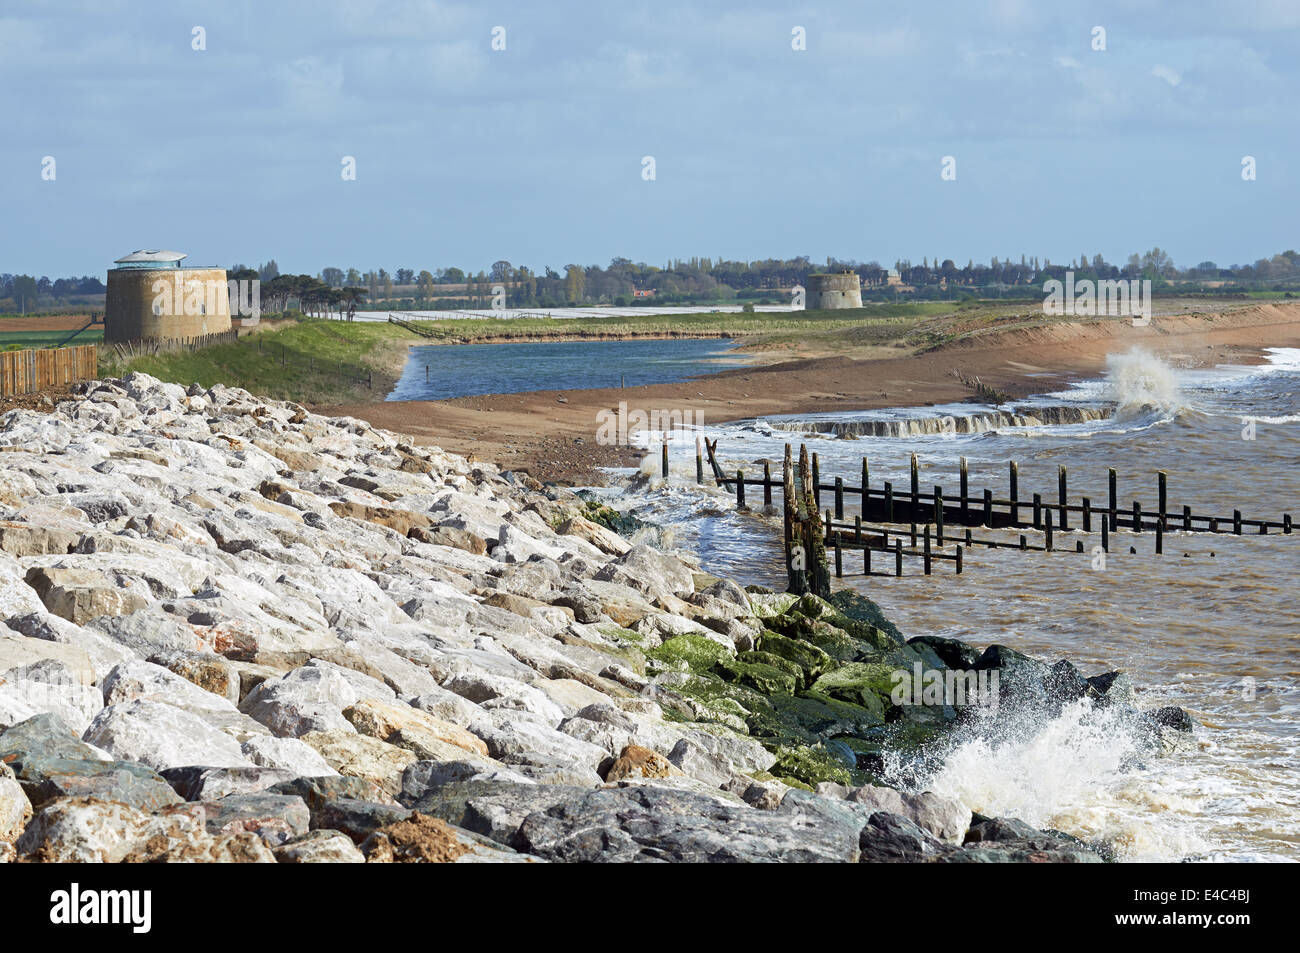 Rock armour protecting the coastline from erosion, East Lane, Bawdsey, Suffolk, UK. Stock Photo